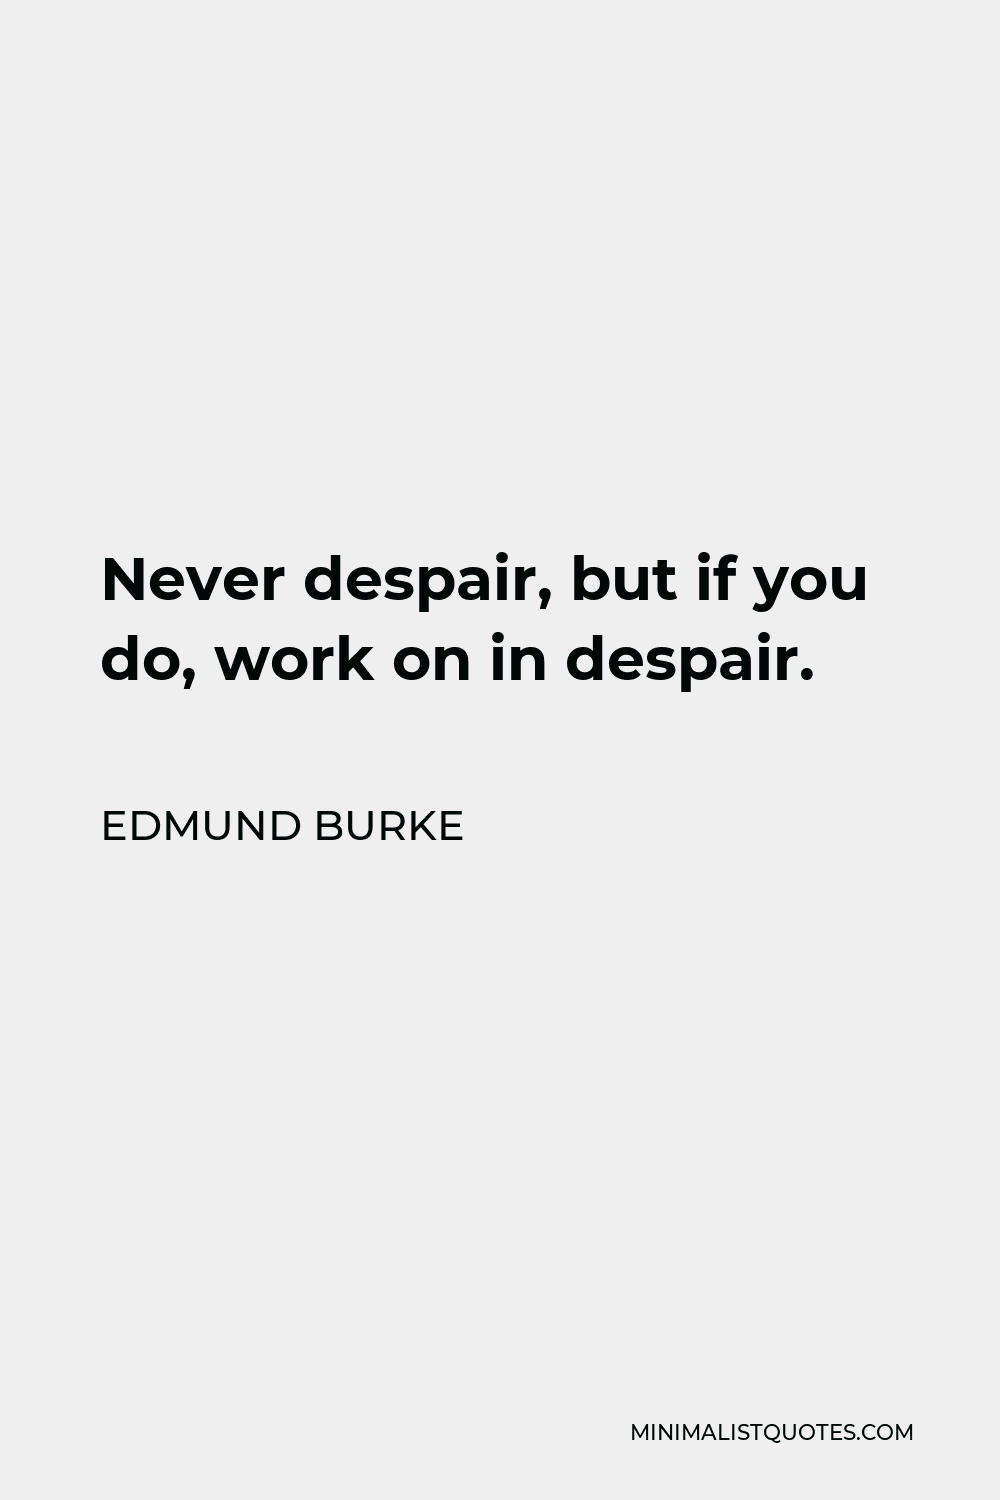 Edmund Burke Quote - Never despair, but if you do, work on in despair.